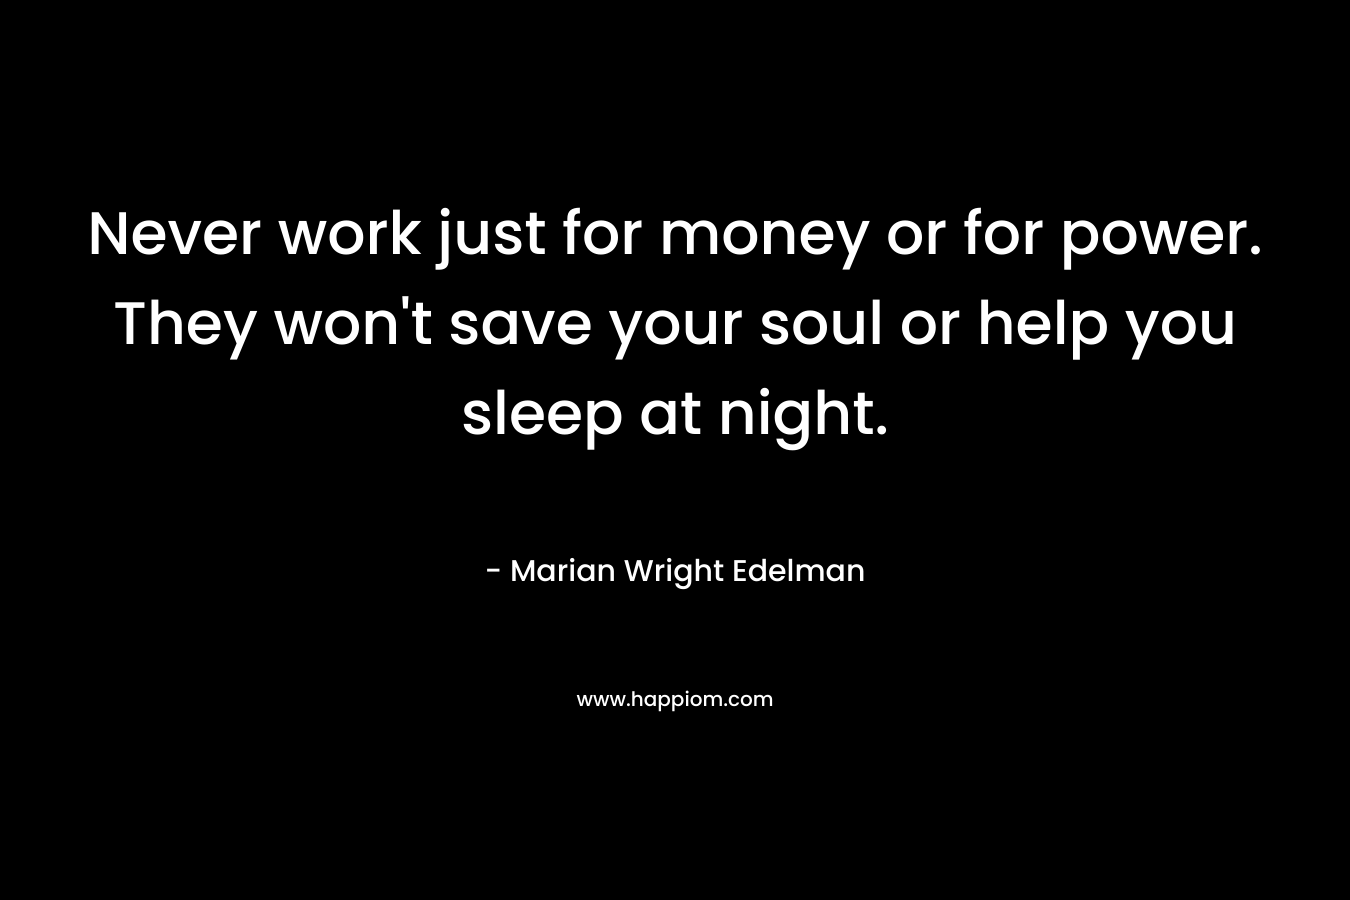 Never work just for money or for power. They won’t save your soul or help you sleep at night. – Marian Wright Edelman